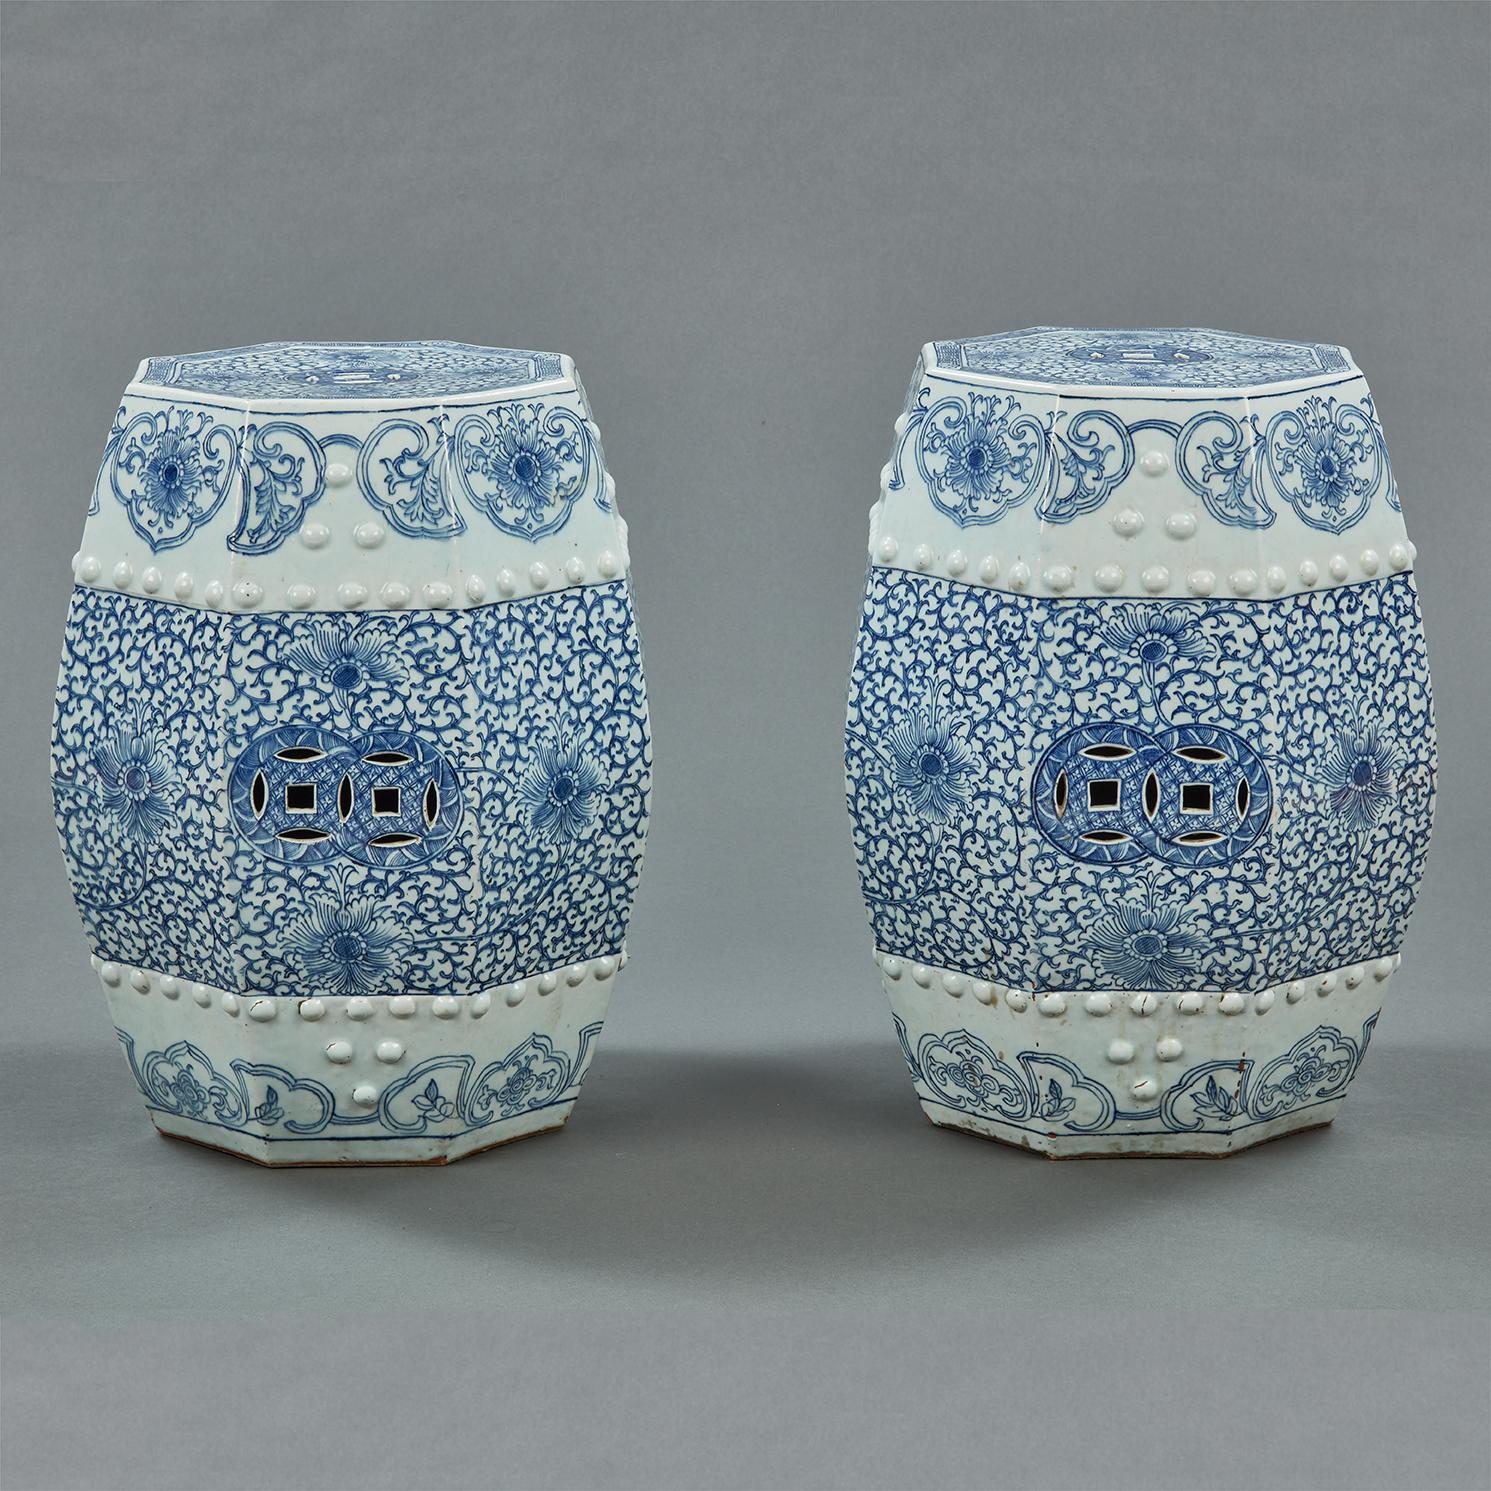 Glazed Pair of 19th Century Octagonal Chinese Blue and White Porcelain Garden Seats For Sale